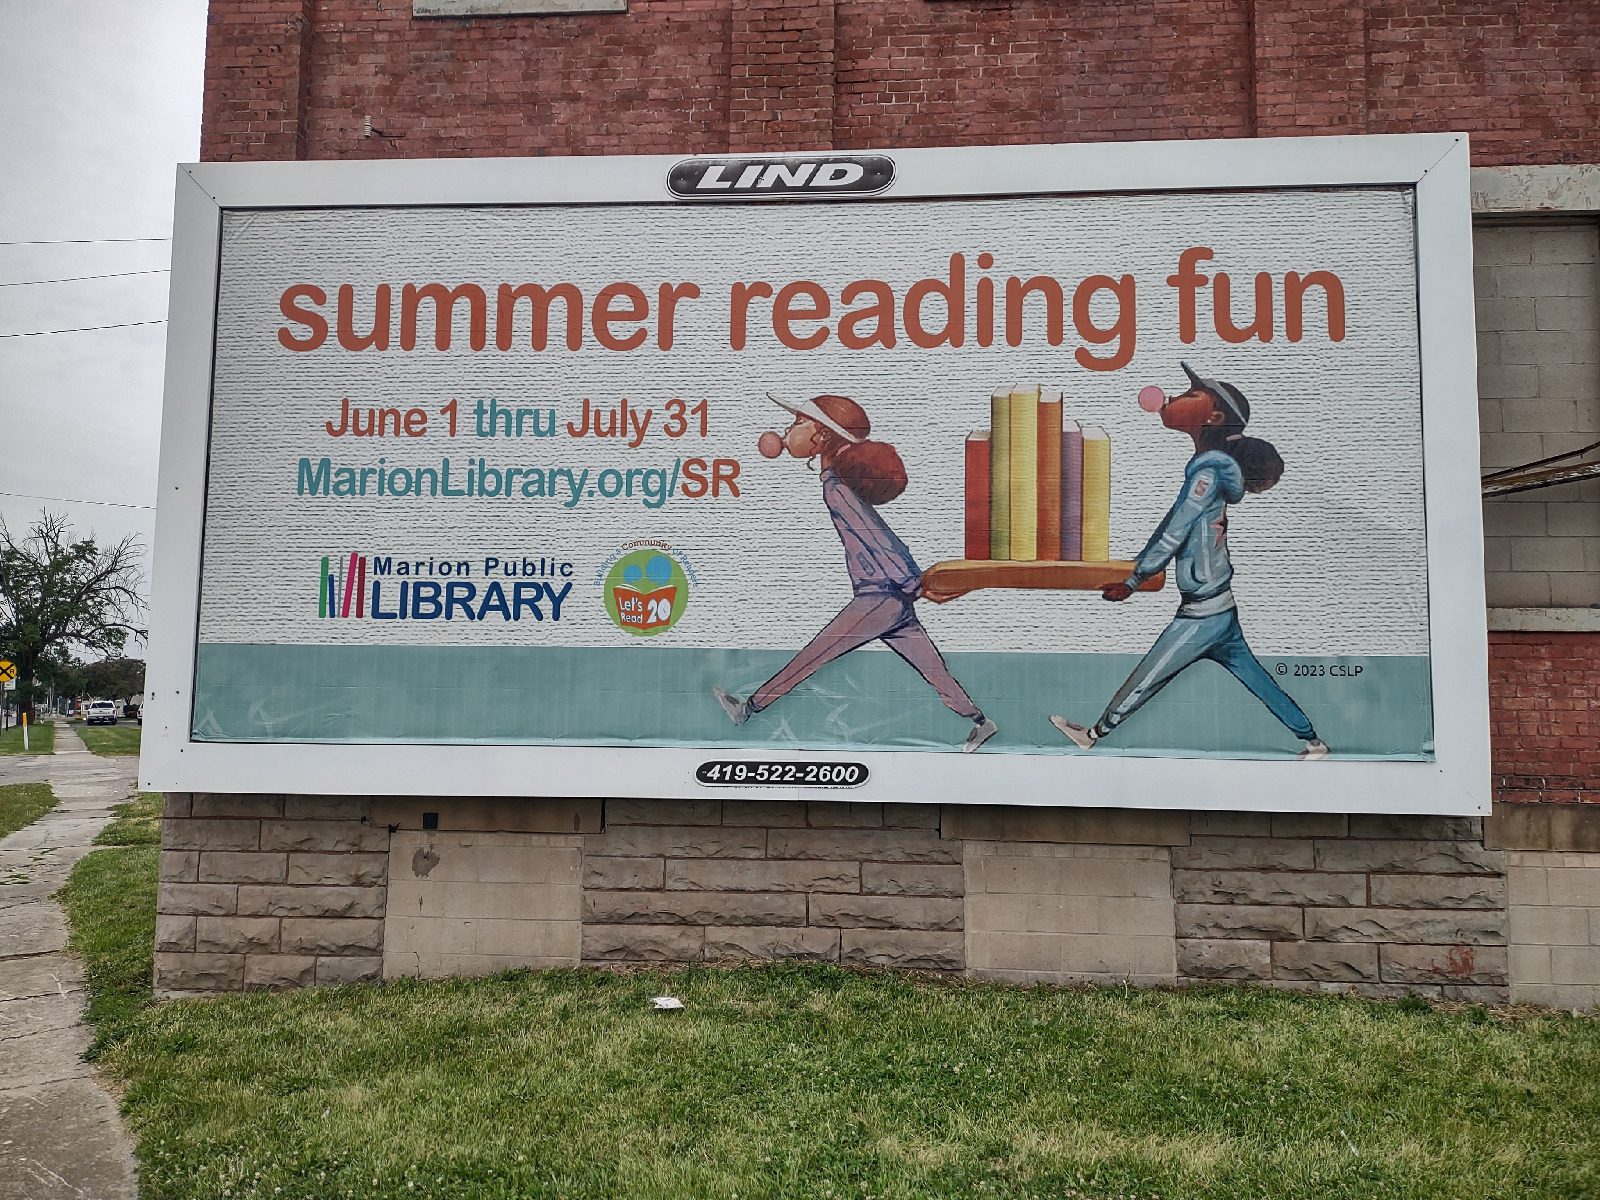 Marion Public Library, library billboard, reading billboard, summer reading program billboard